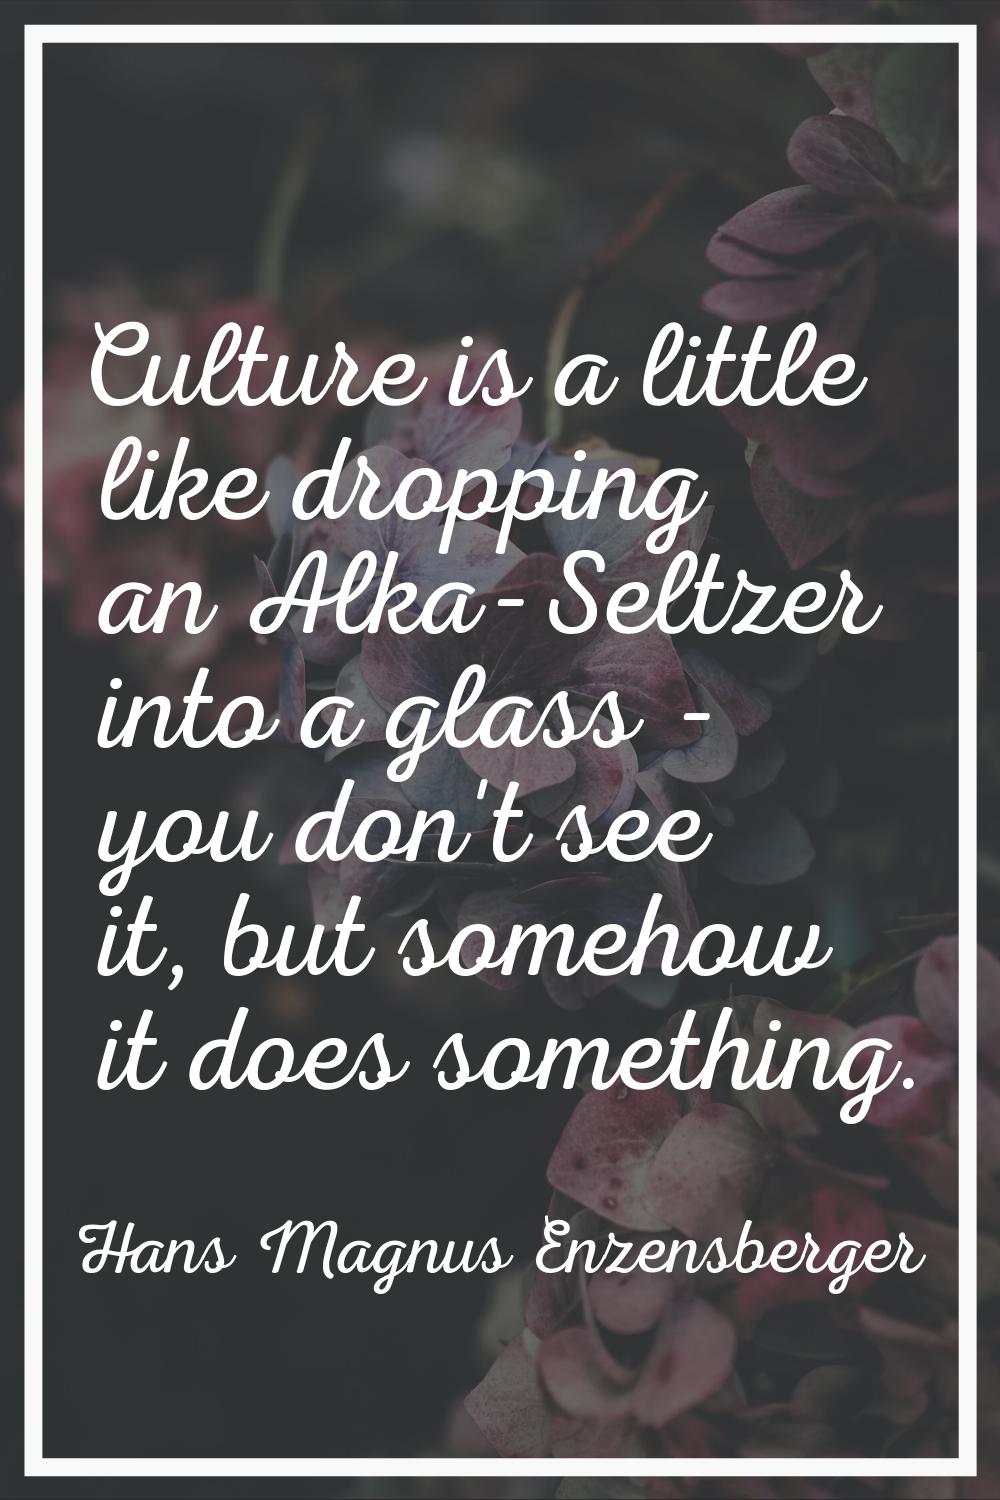 Culture is a little like dropping an Alka-Seltzer into a glass - you don't see it, but somehow it d